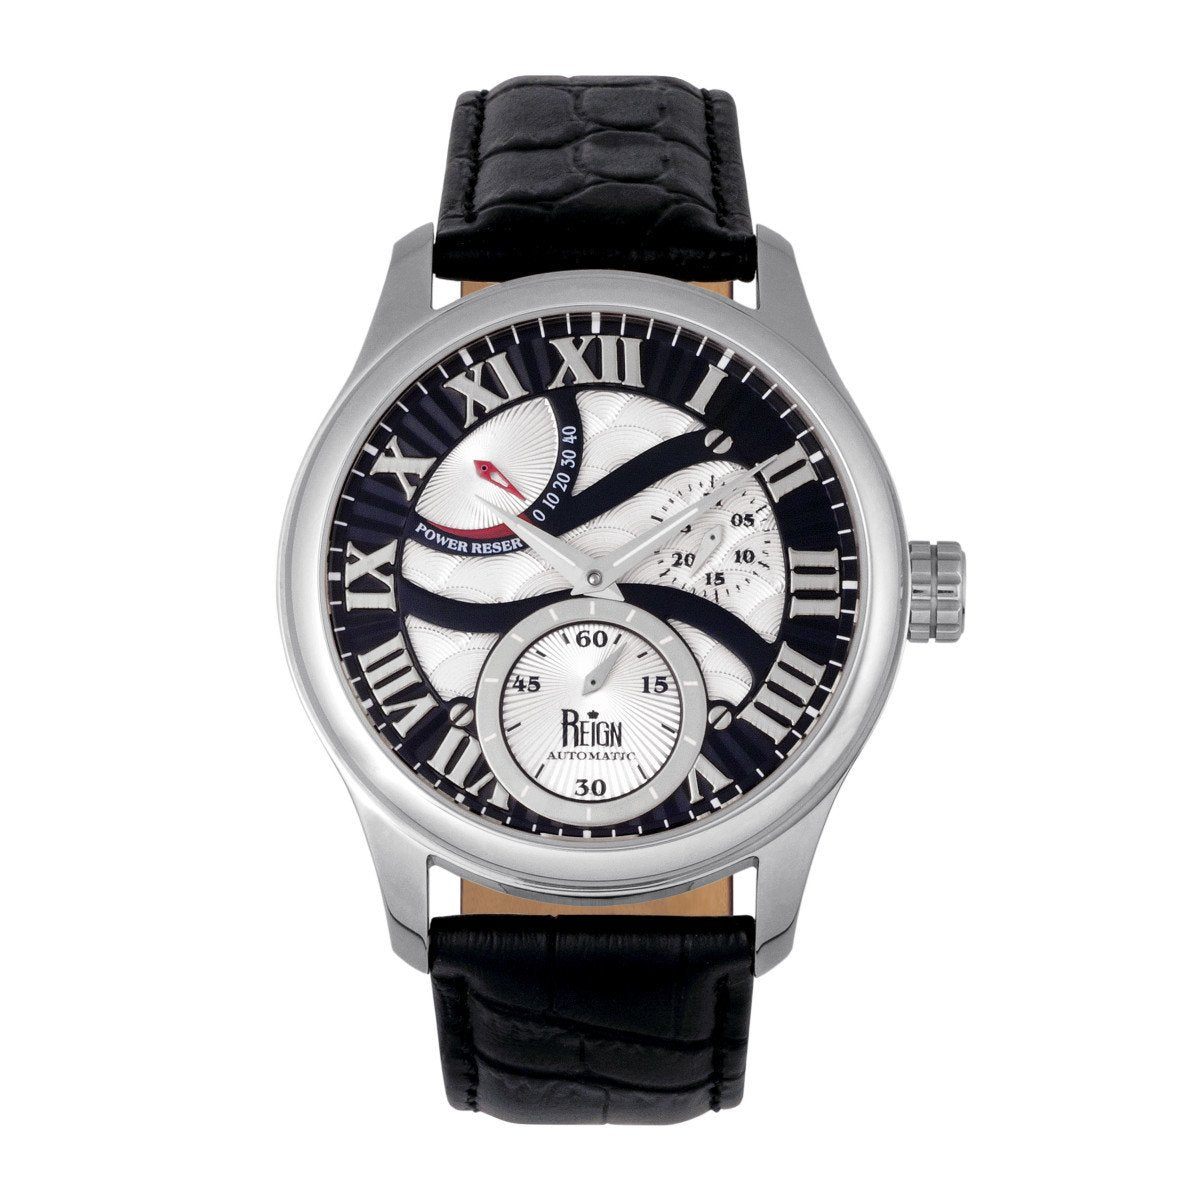 Reign Bhutan Leather-Band Automatic Watch - Silver/Black - REIRN1602